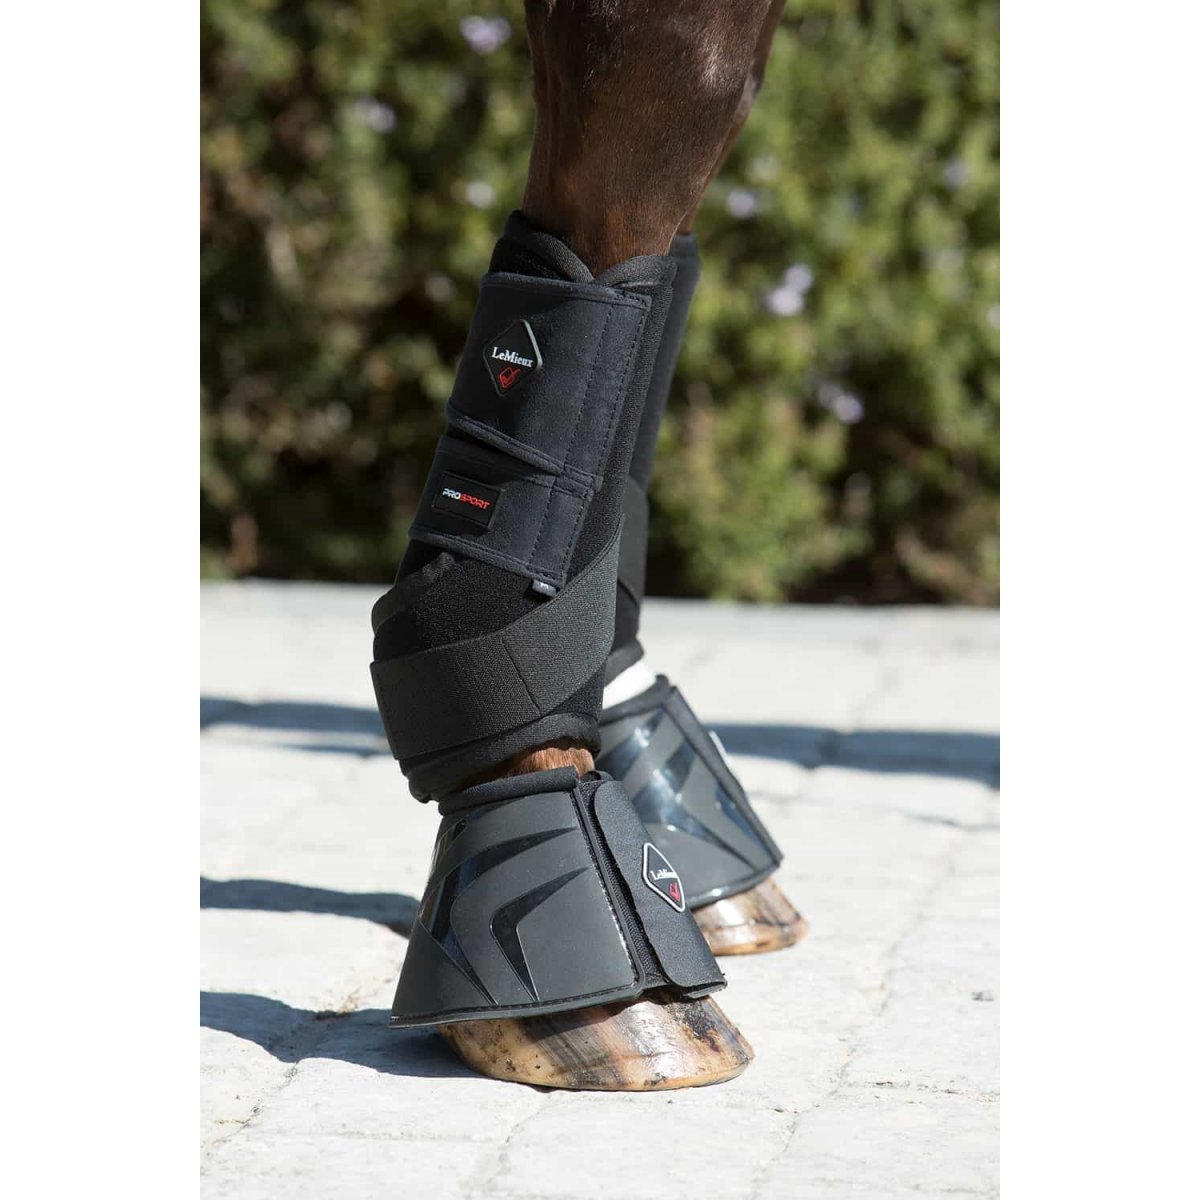 LeMieux Ultra Support Boots-Southern Sport Horses-The Equestrian